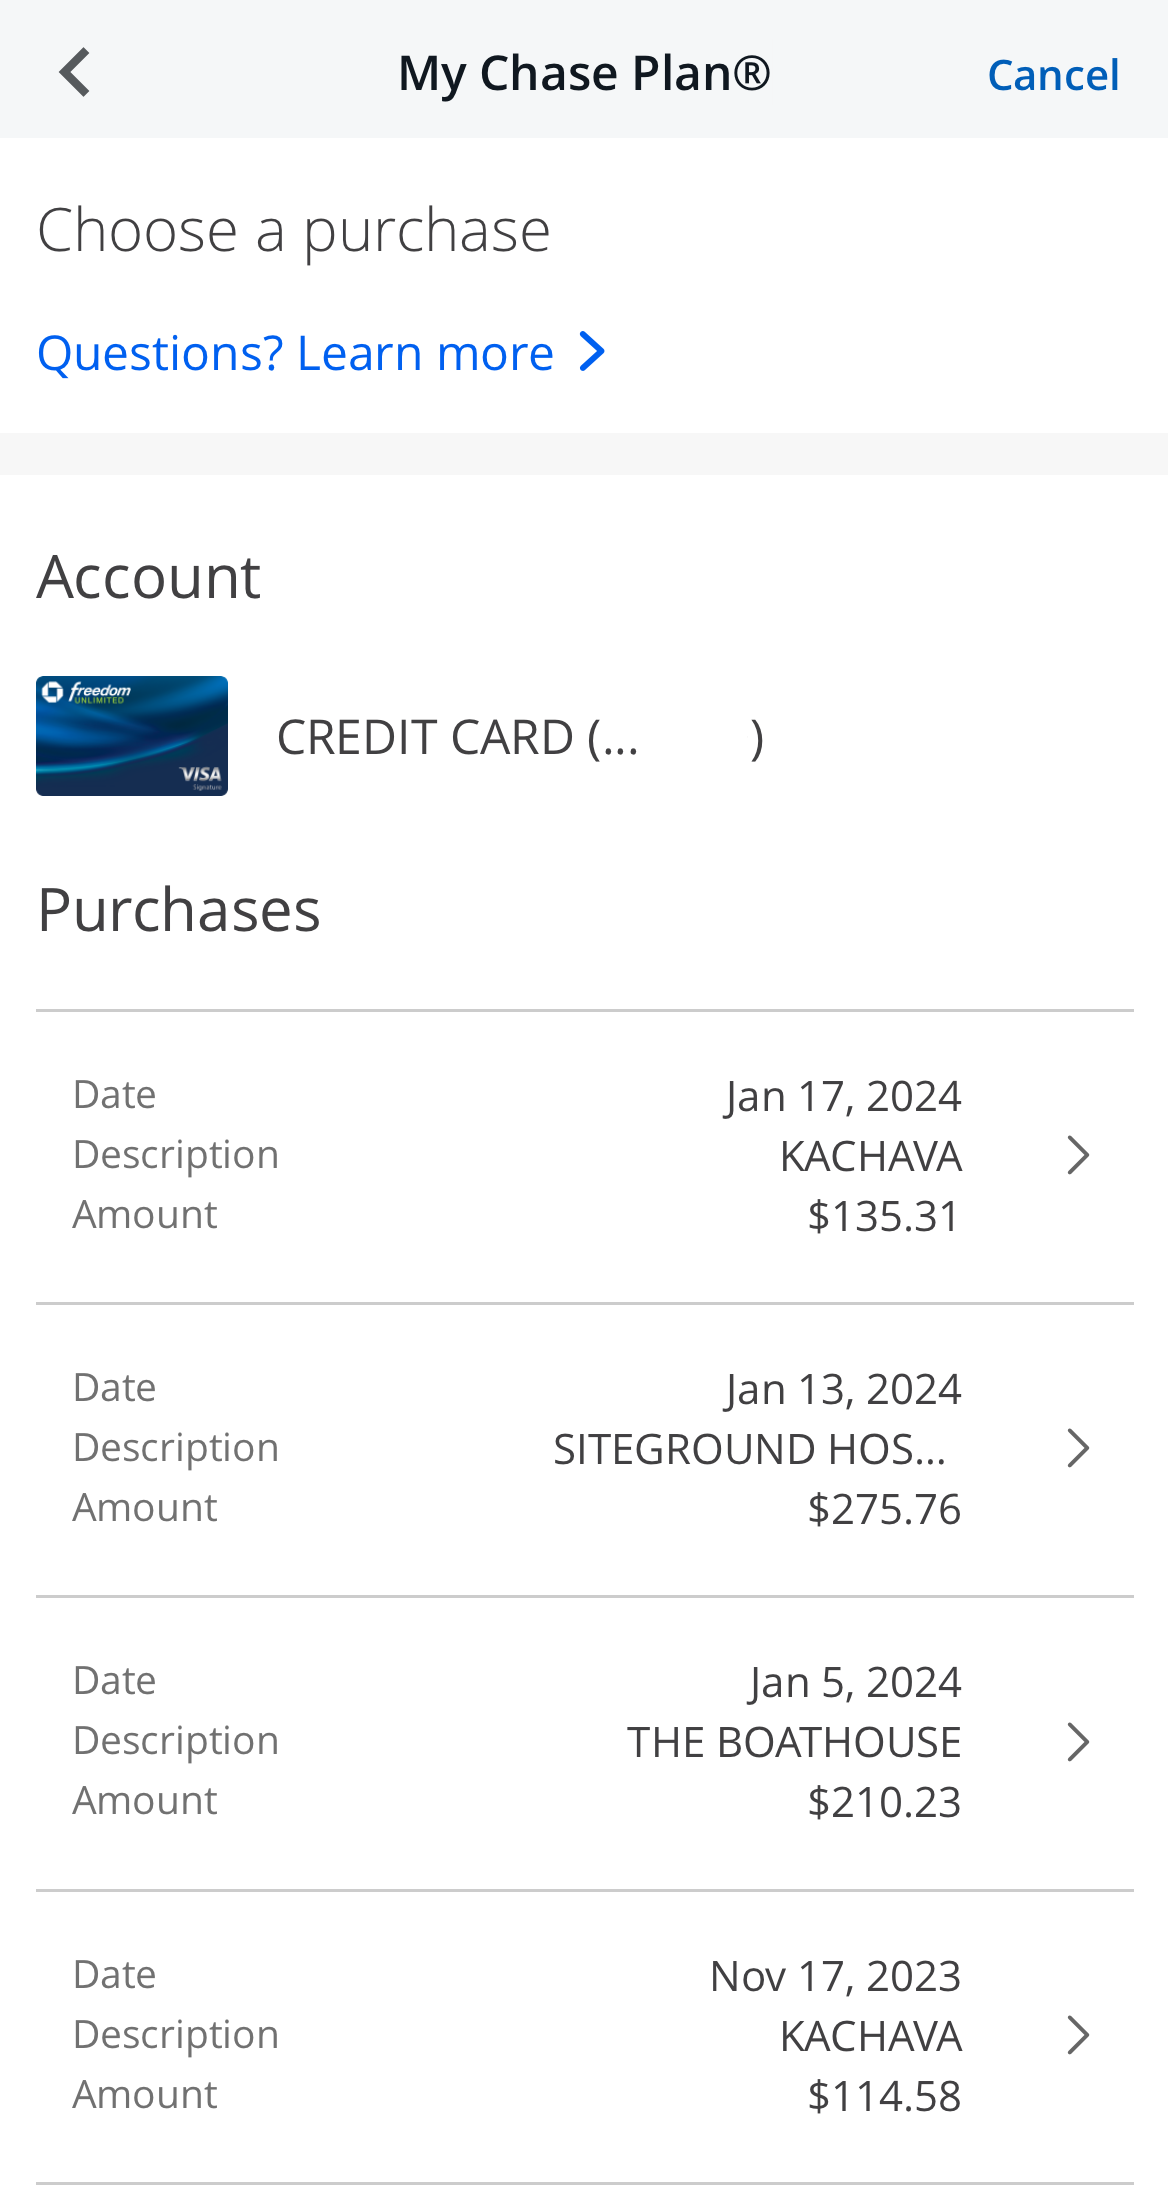 My Chase Plan with Chase Unlimited card